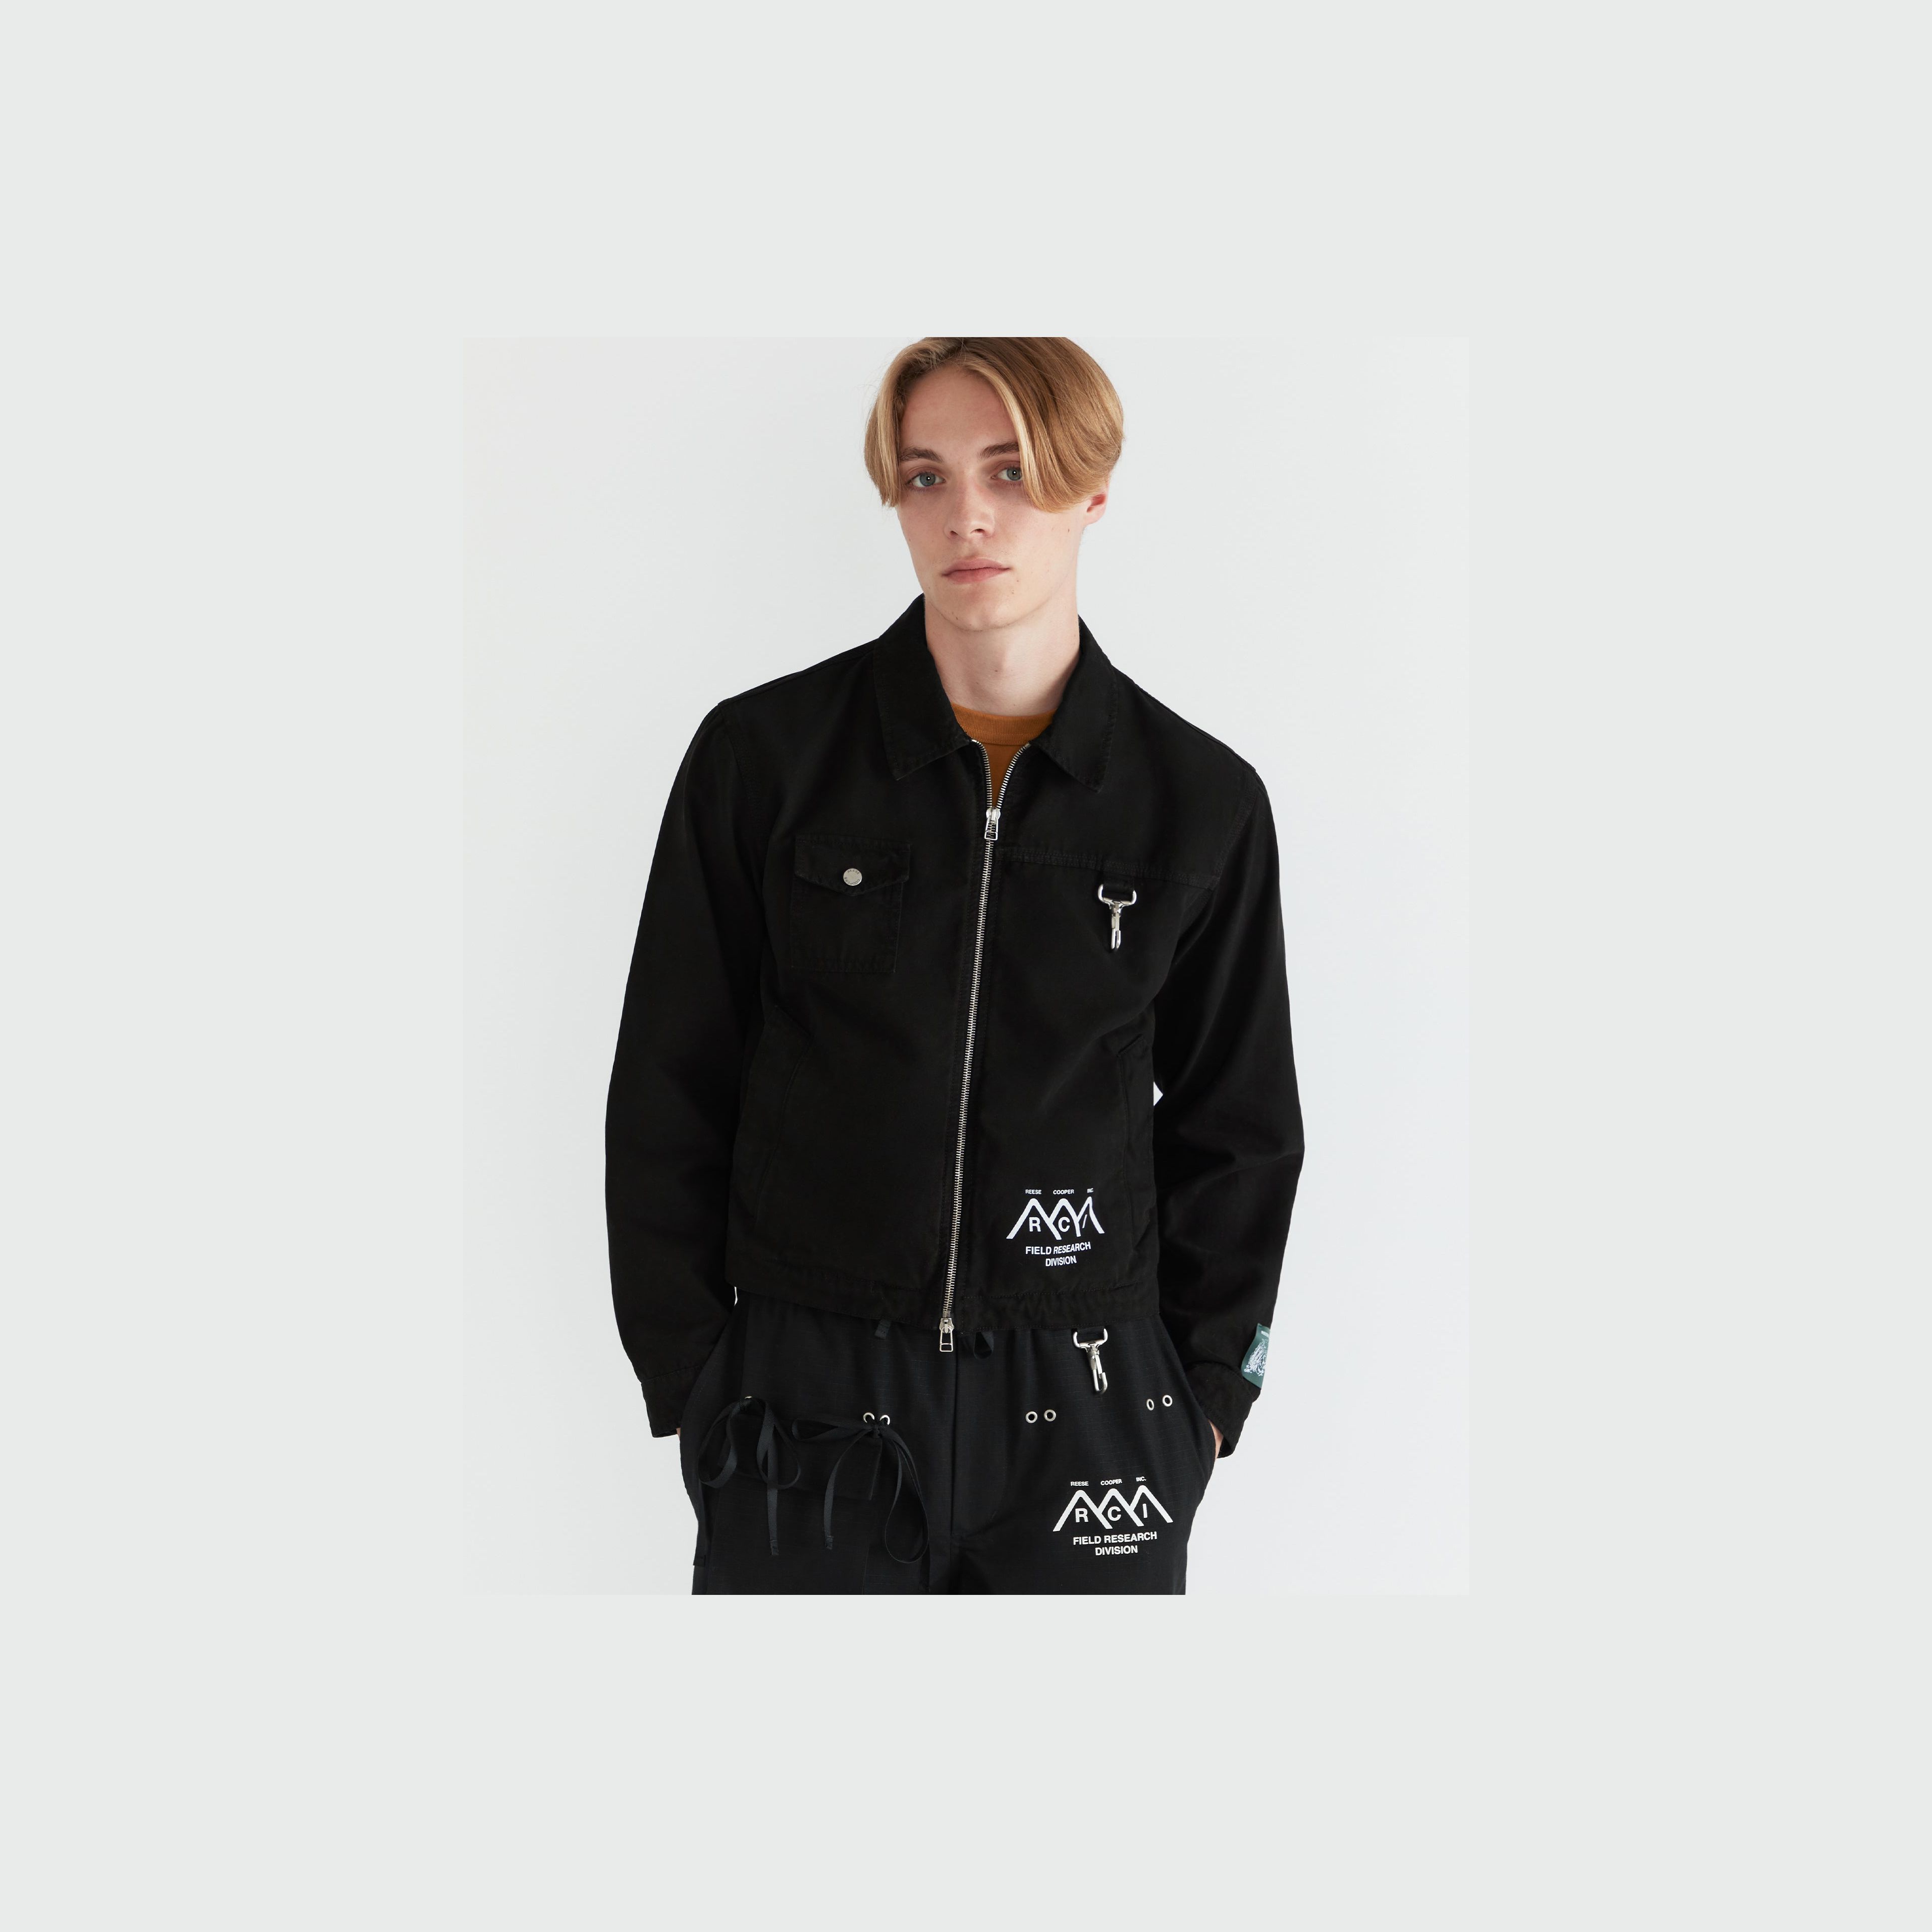 Research Division Garment Dyed Work Jacket in Black